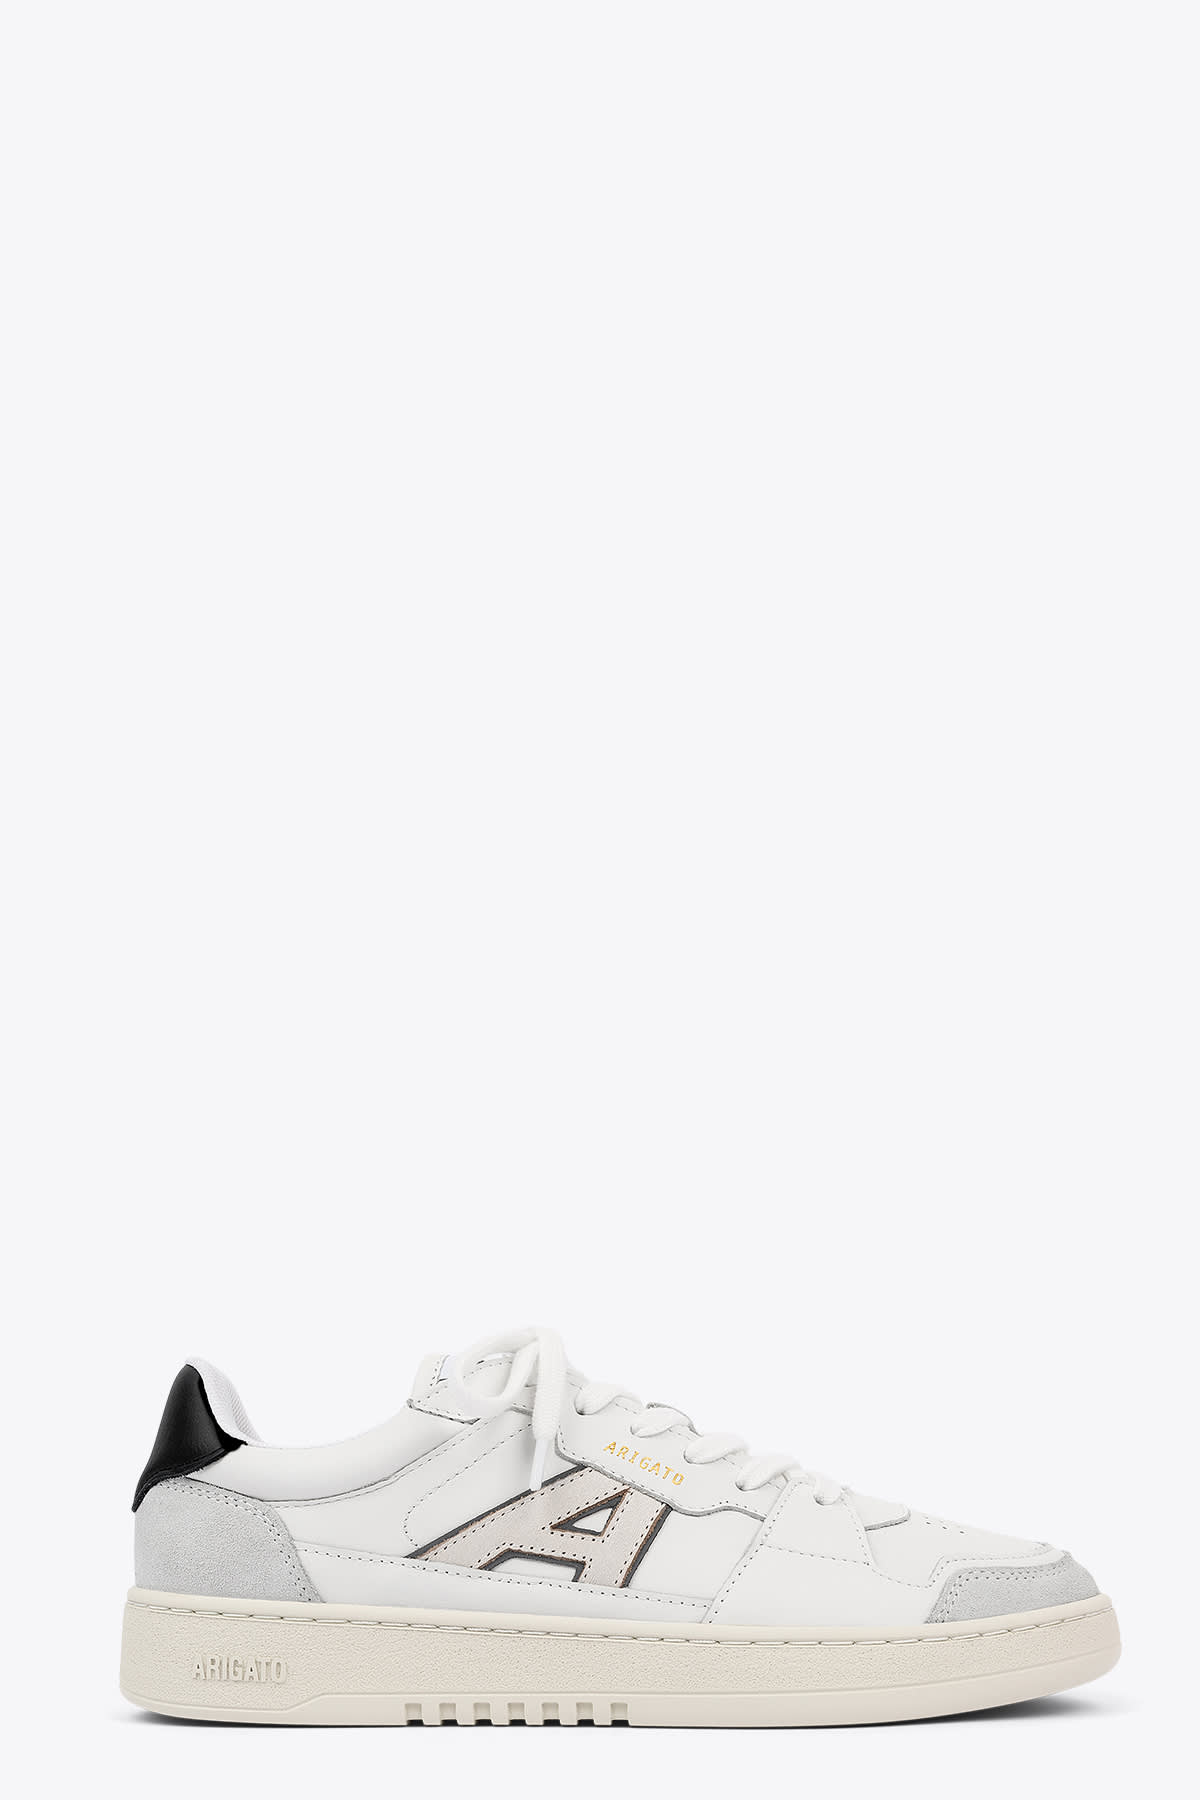 Axel Arigato Ace A White leather low top lace-up sneaker - A-dice low